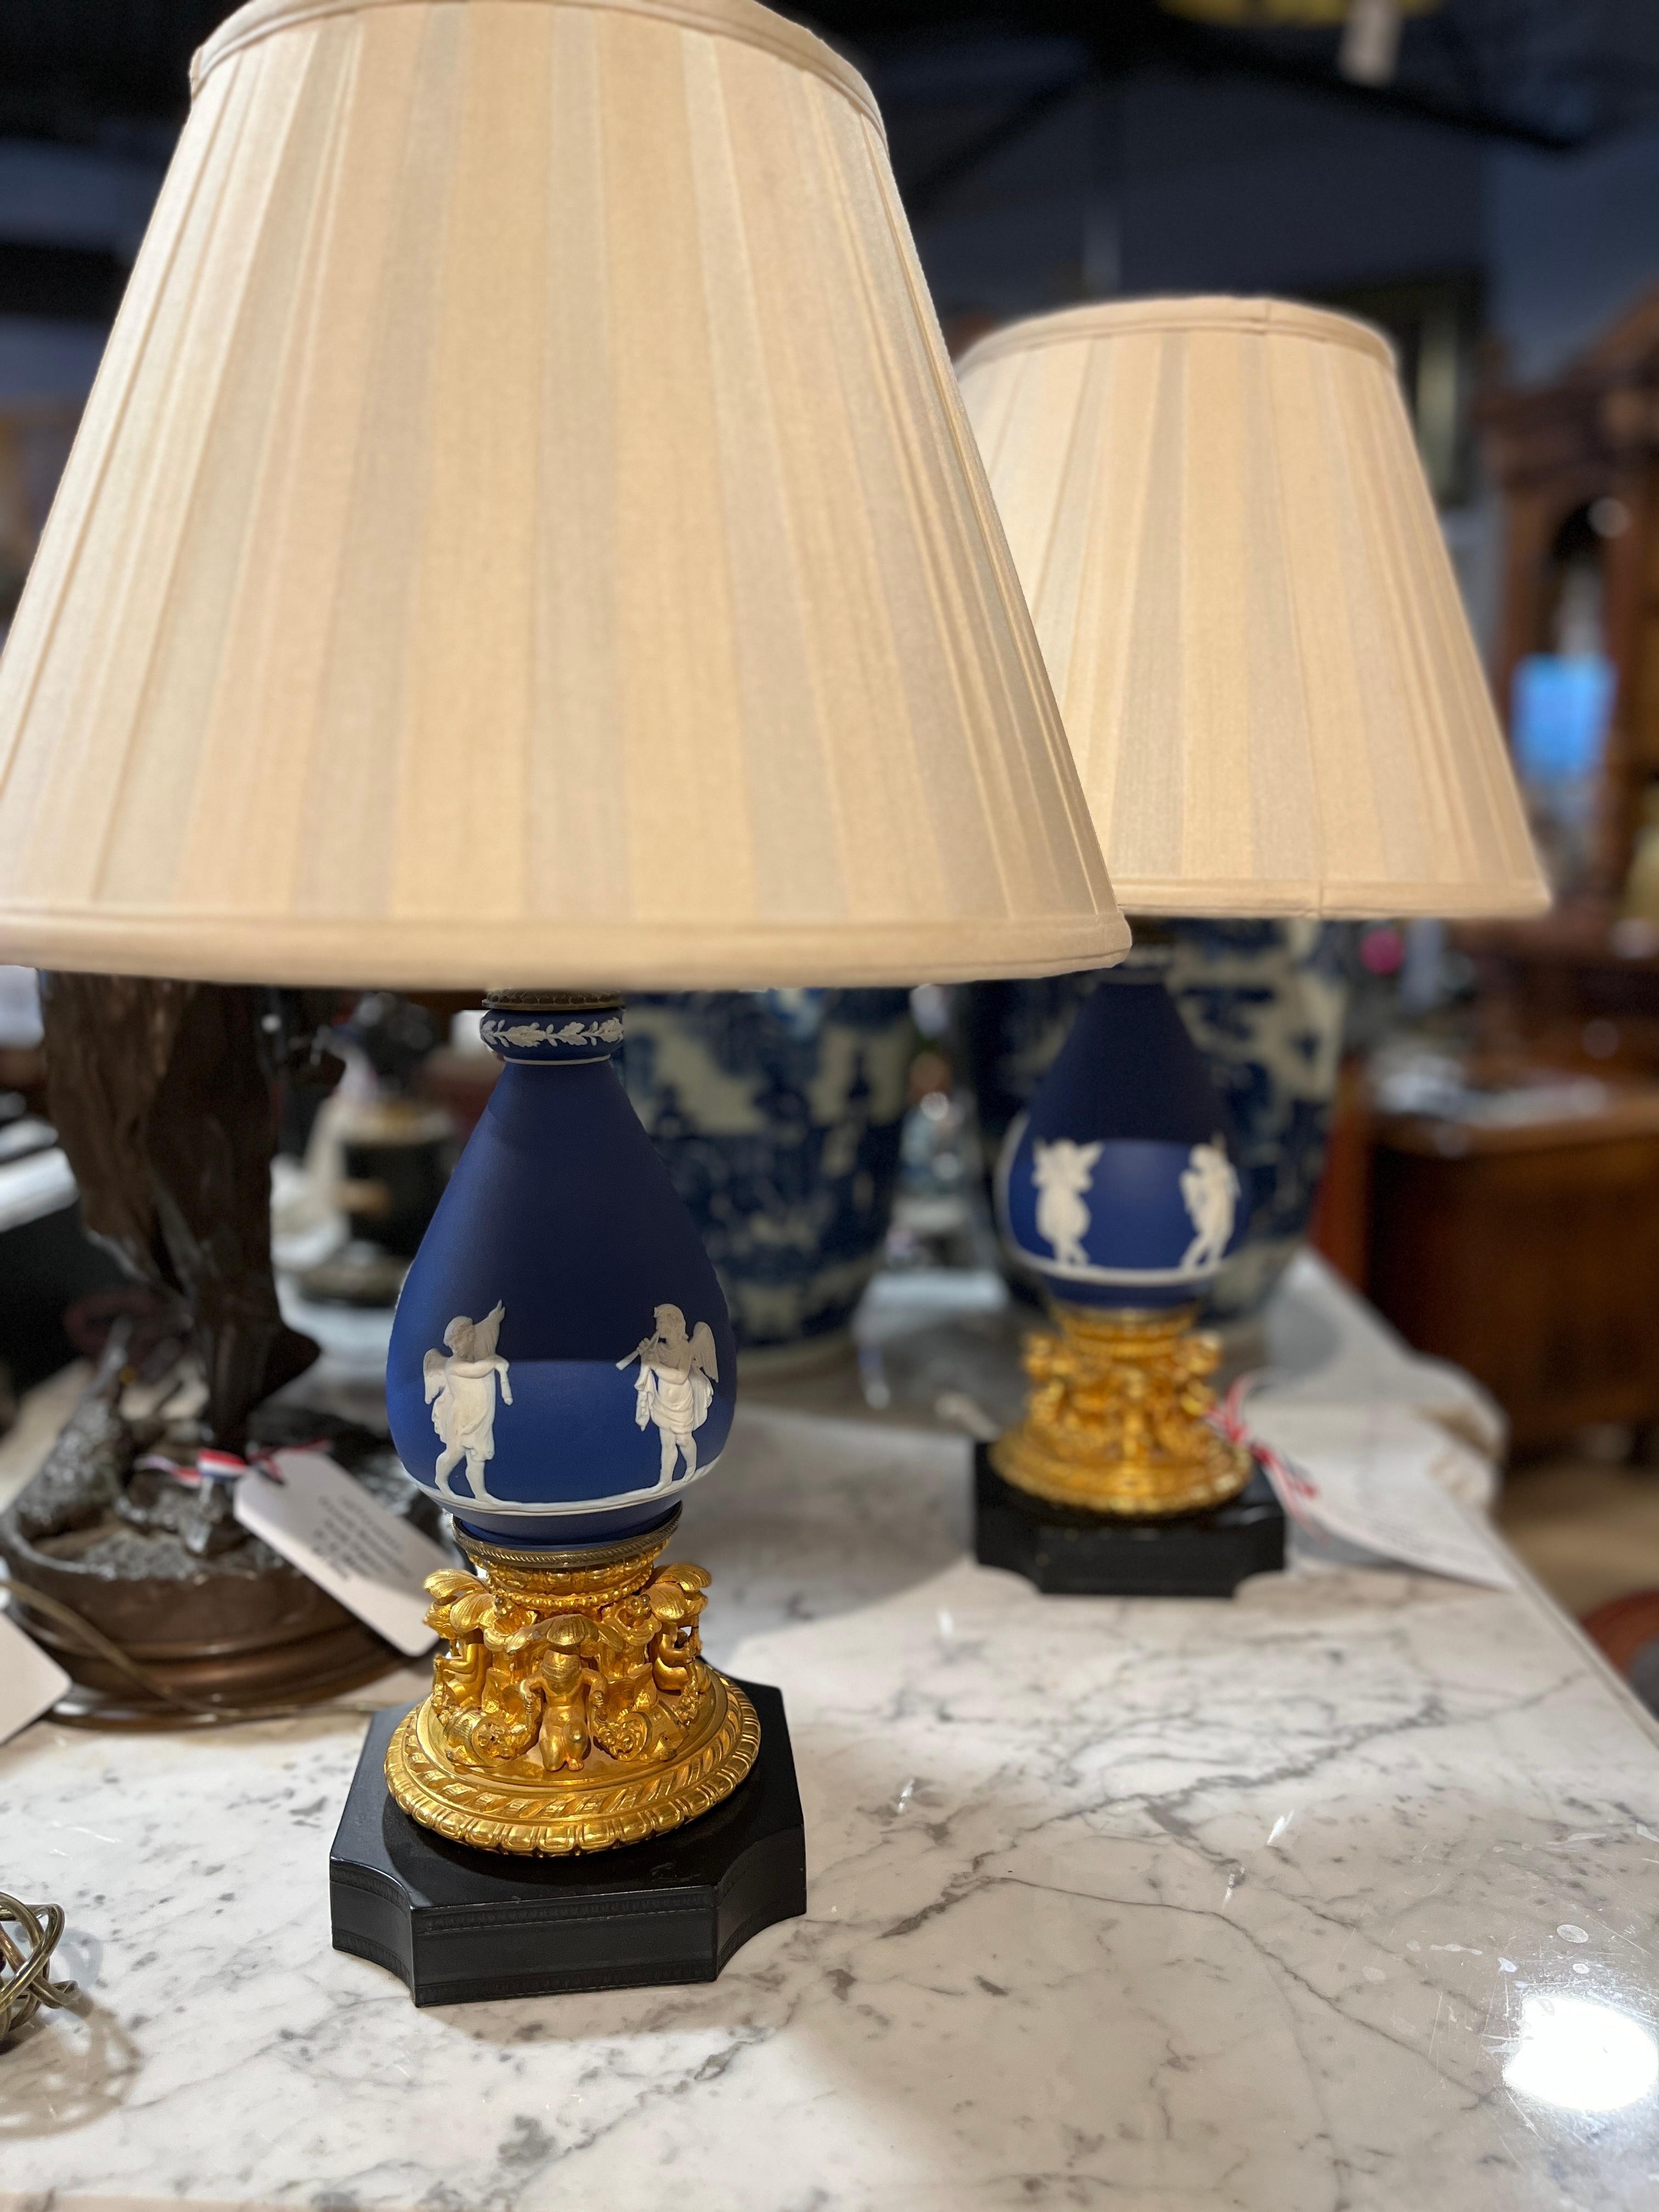 Pair of Antique 19th Century French Dore Bronze and Wedgewood Urn Lamps.  Shades Not included.